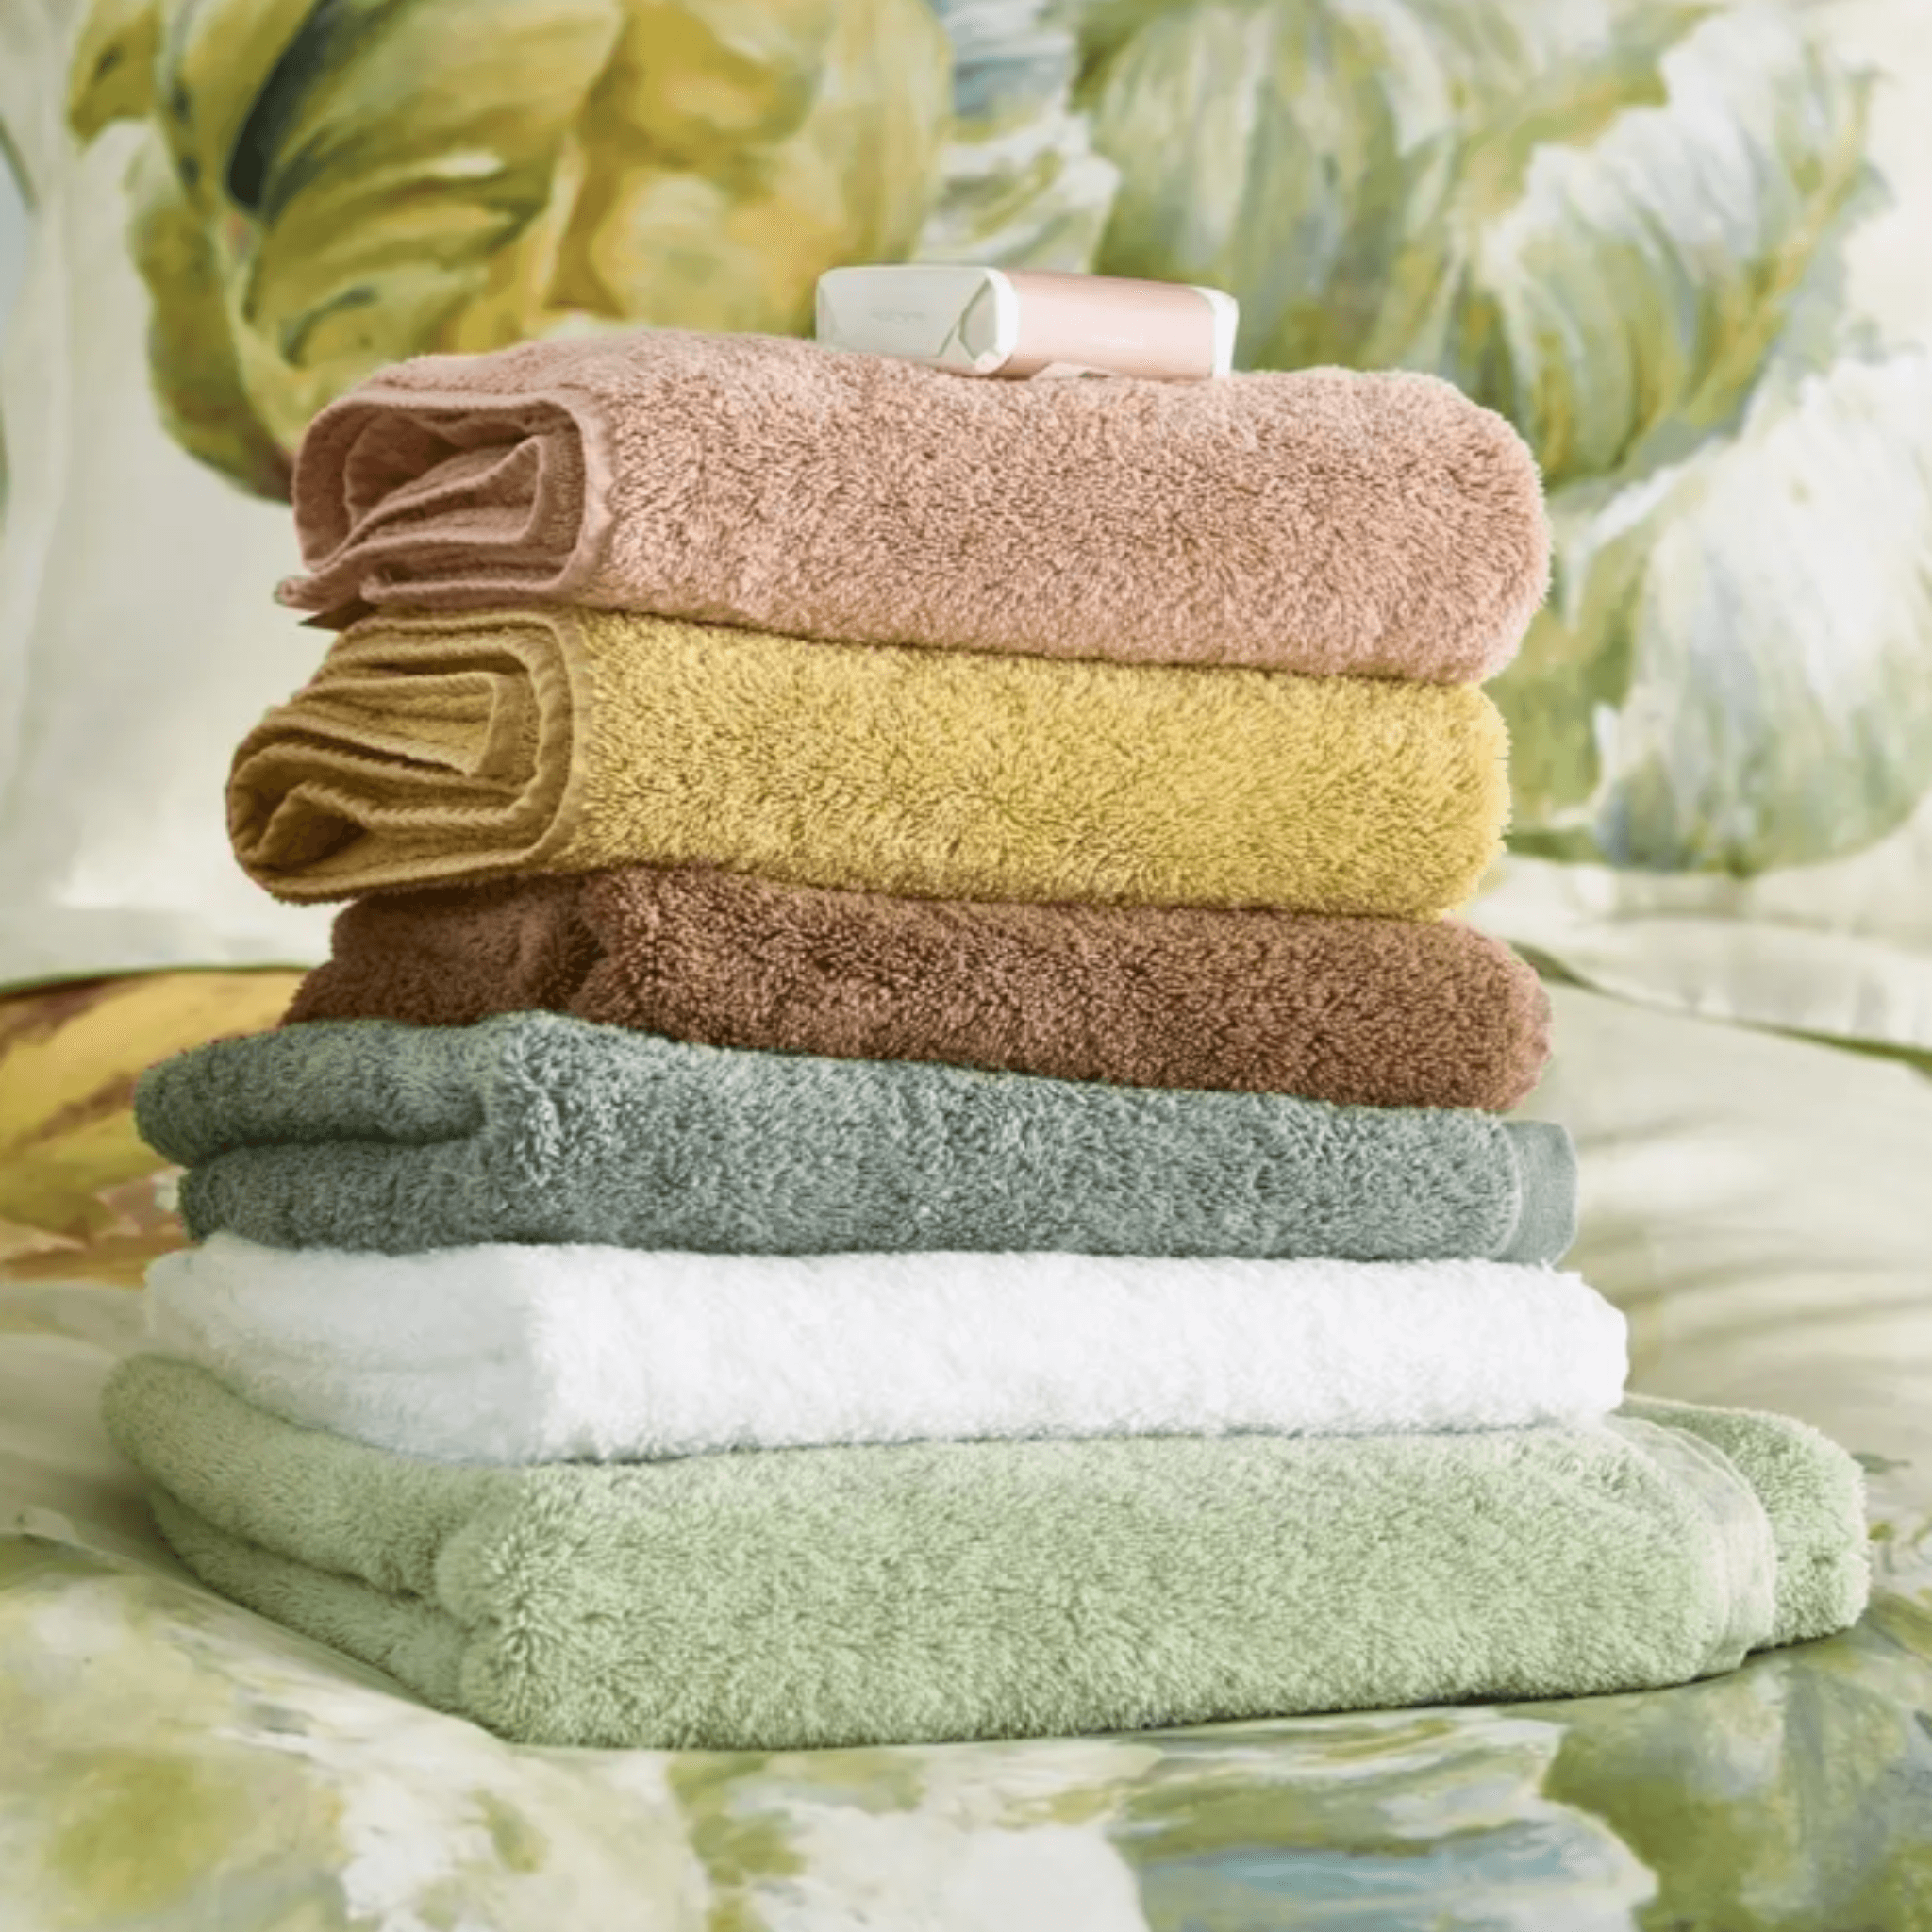 100% Organic Cotton Willow Green Loweswater Towels Bath Sheet